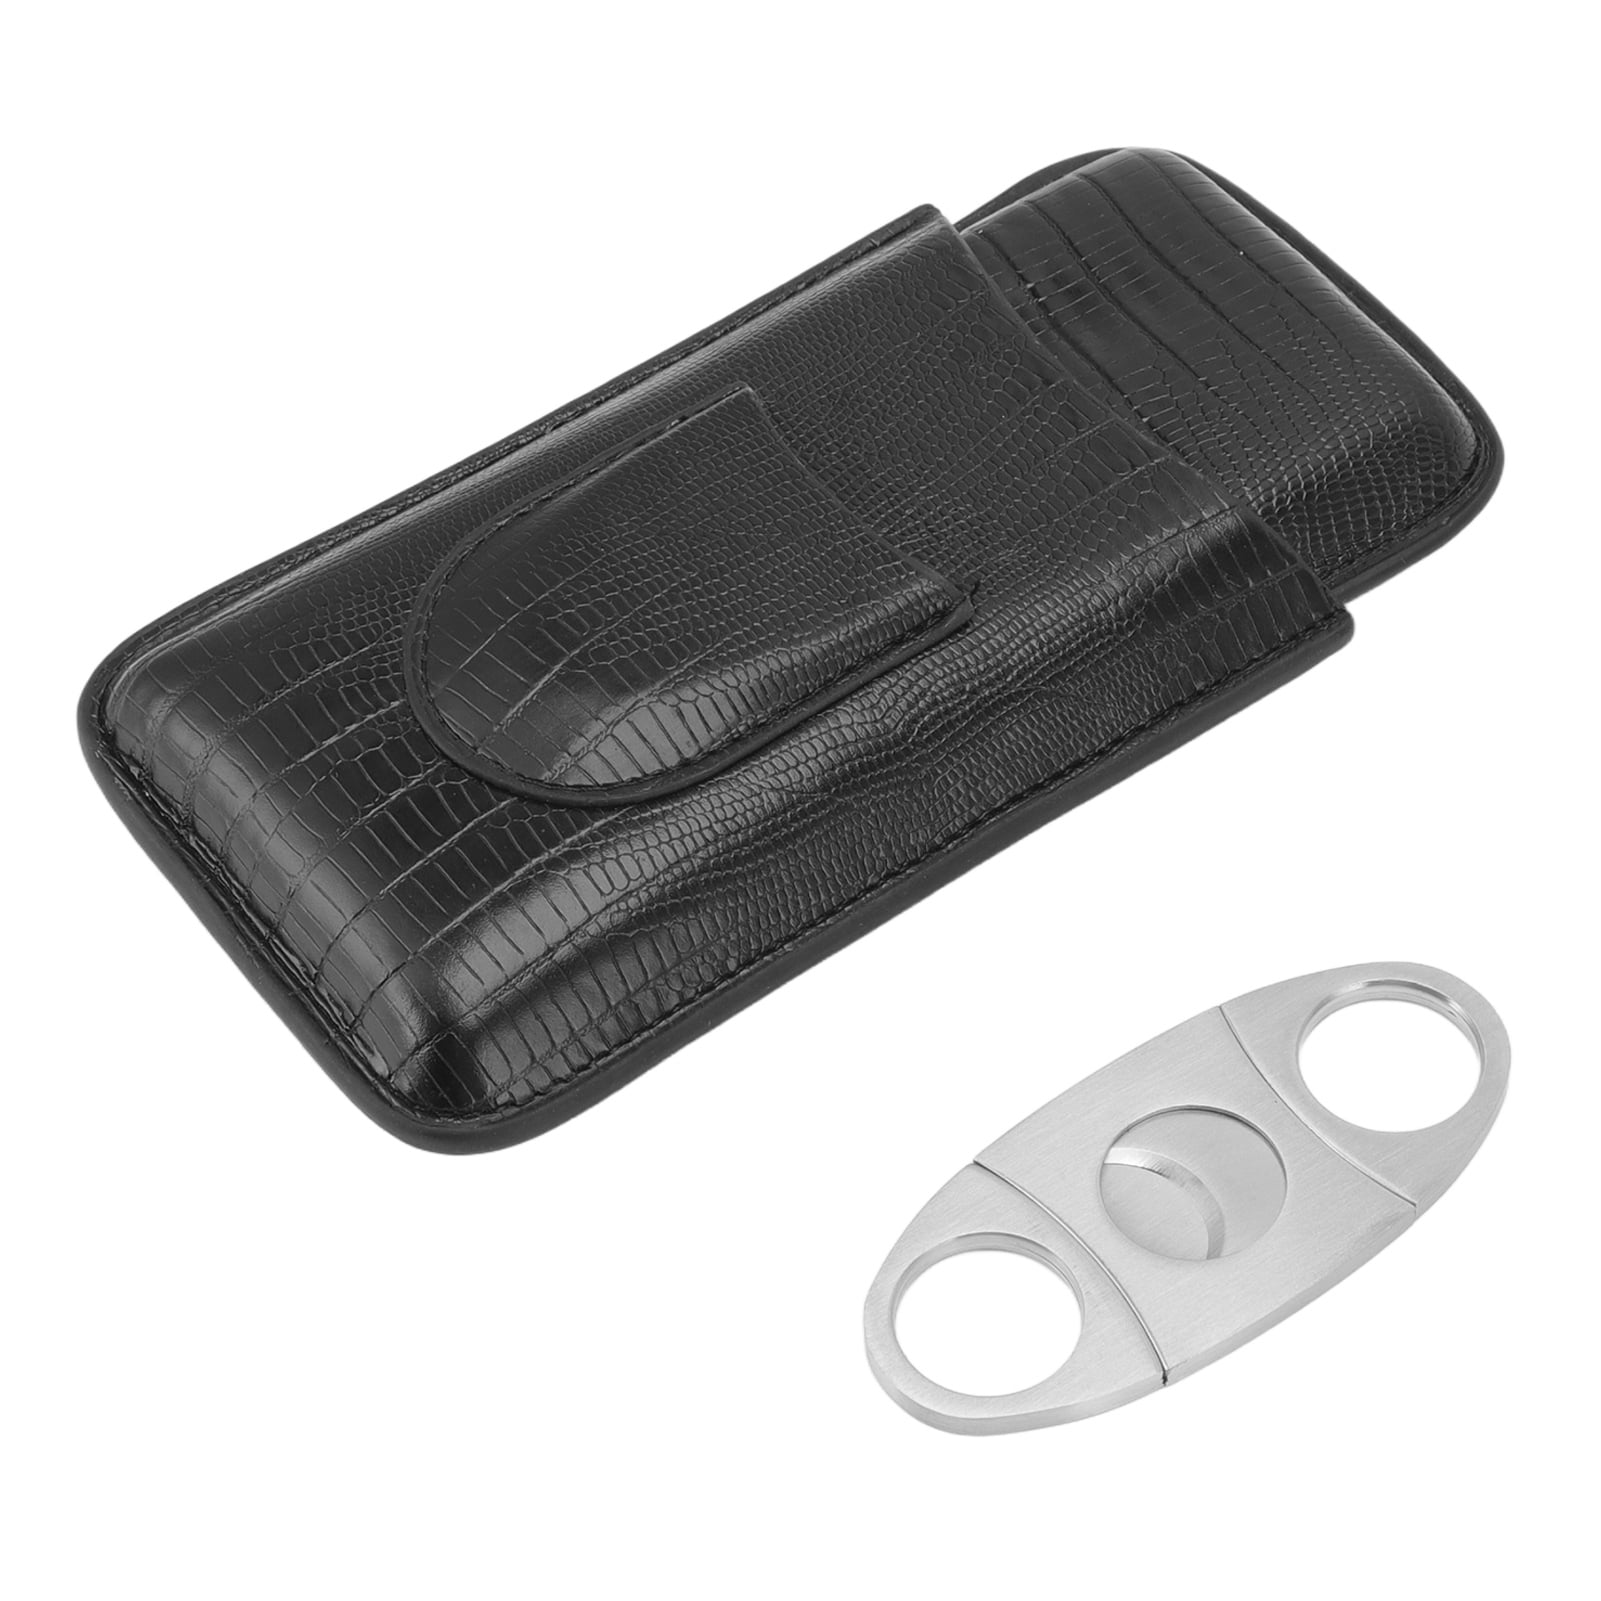 Cigar Leather Case Travel Portable Cigar Holder with Cigar Cutter ...